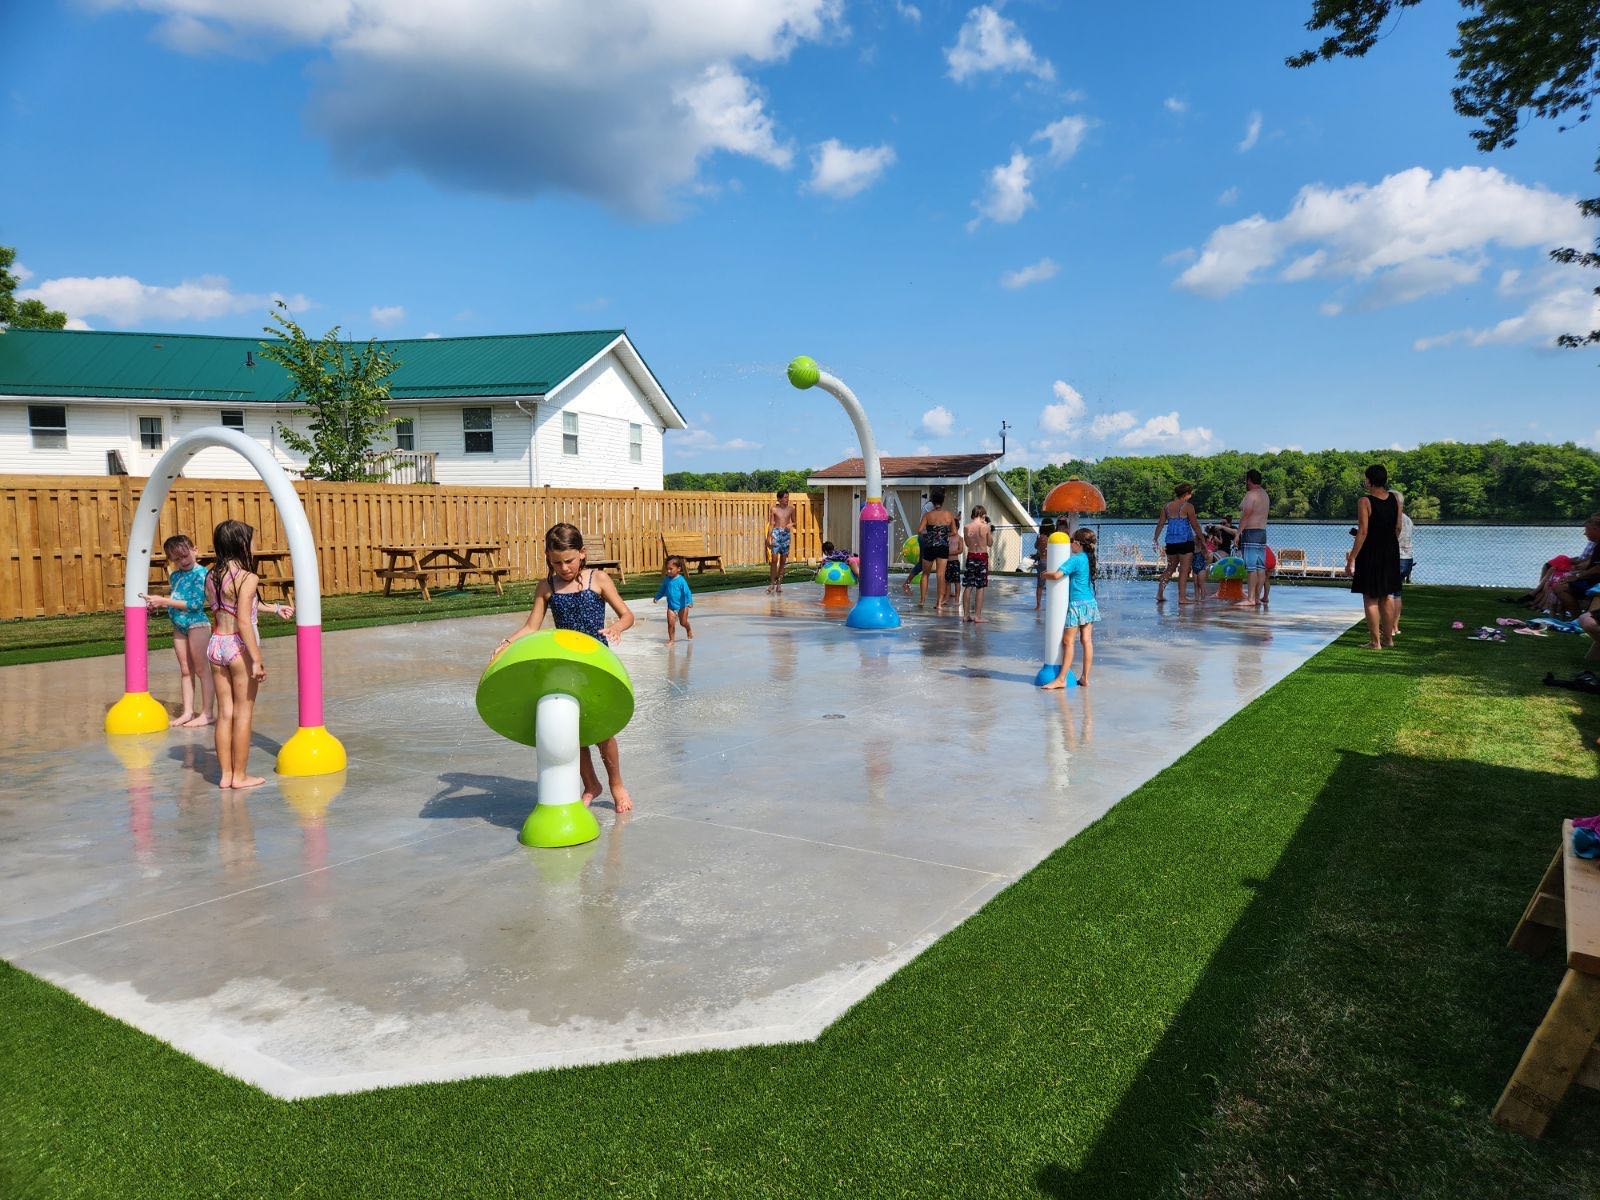 Children frolic and play in the newly opened splash pad at Elim Lodge